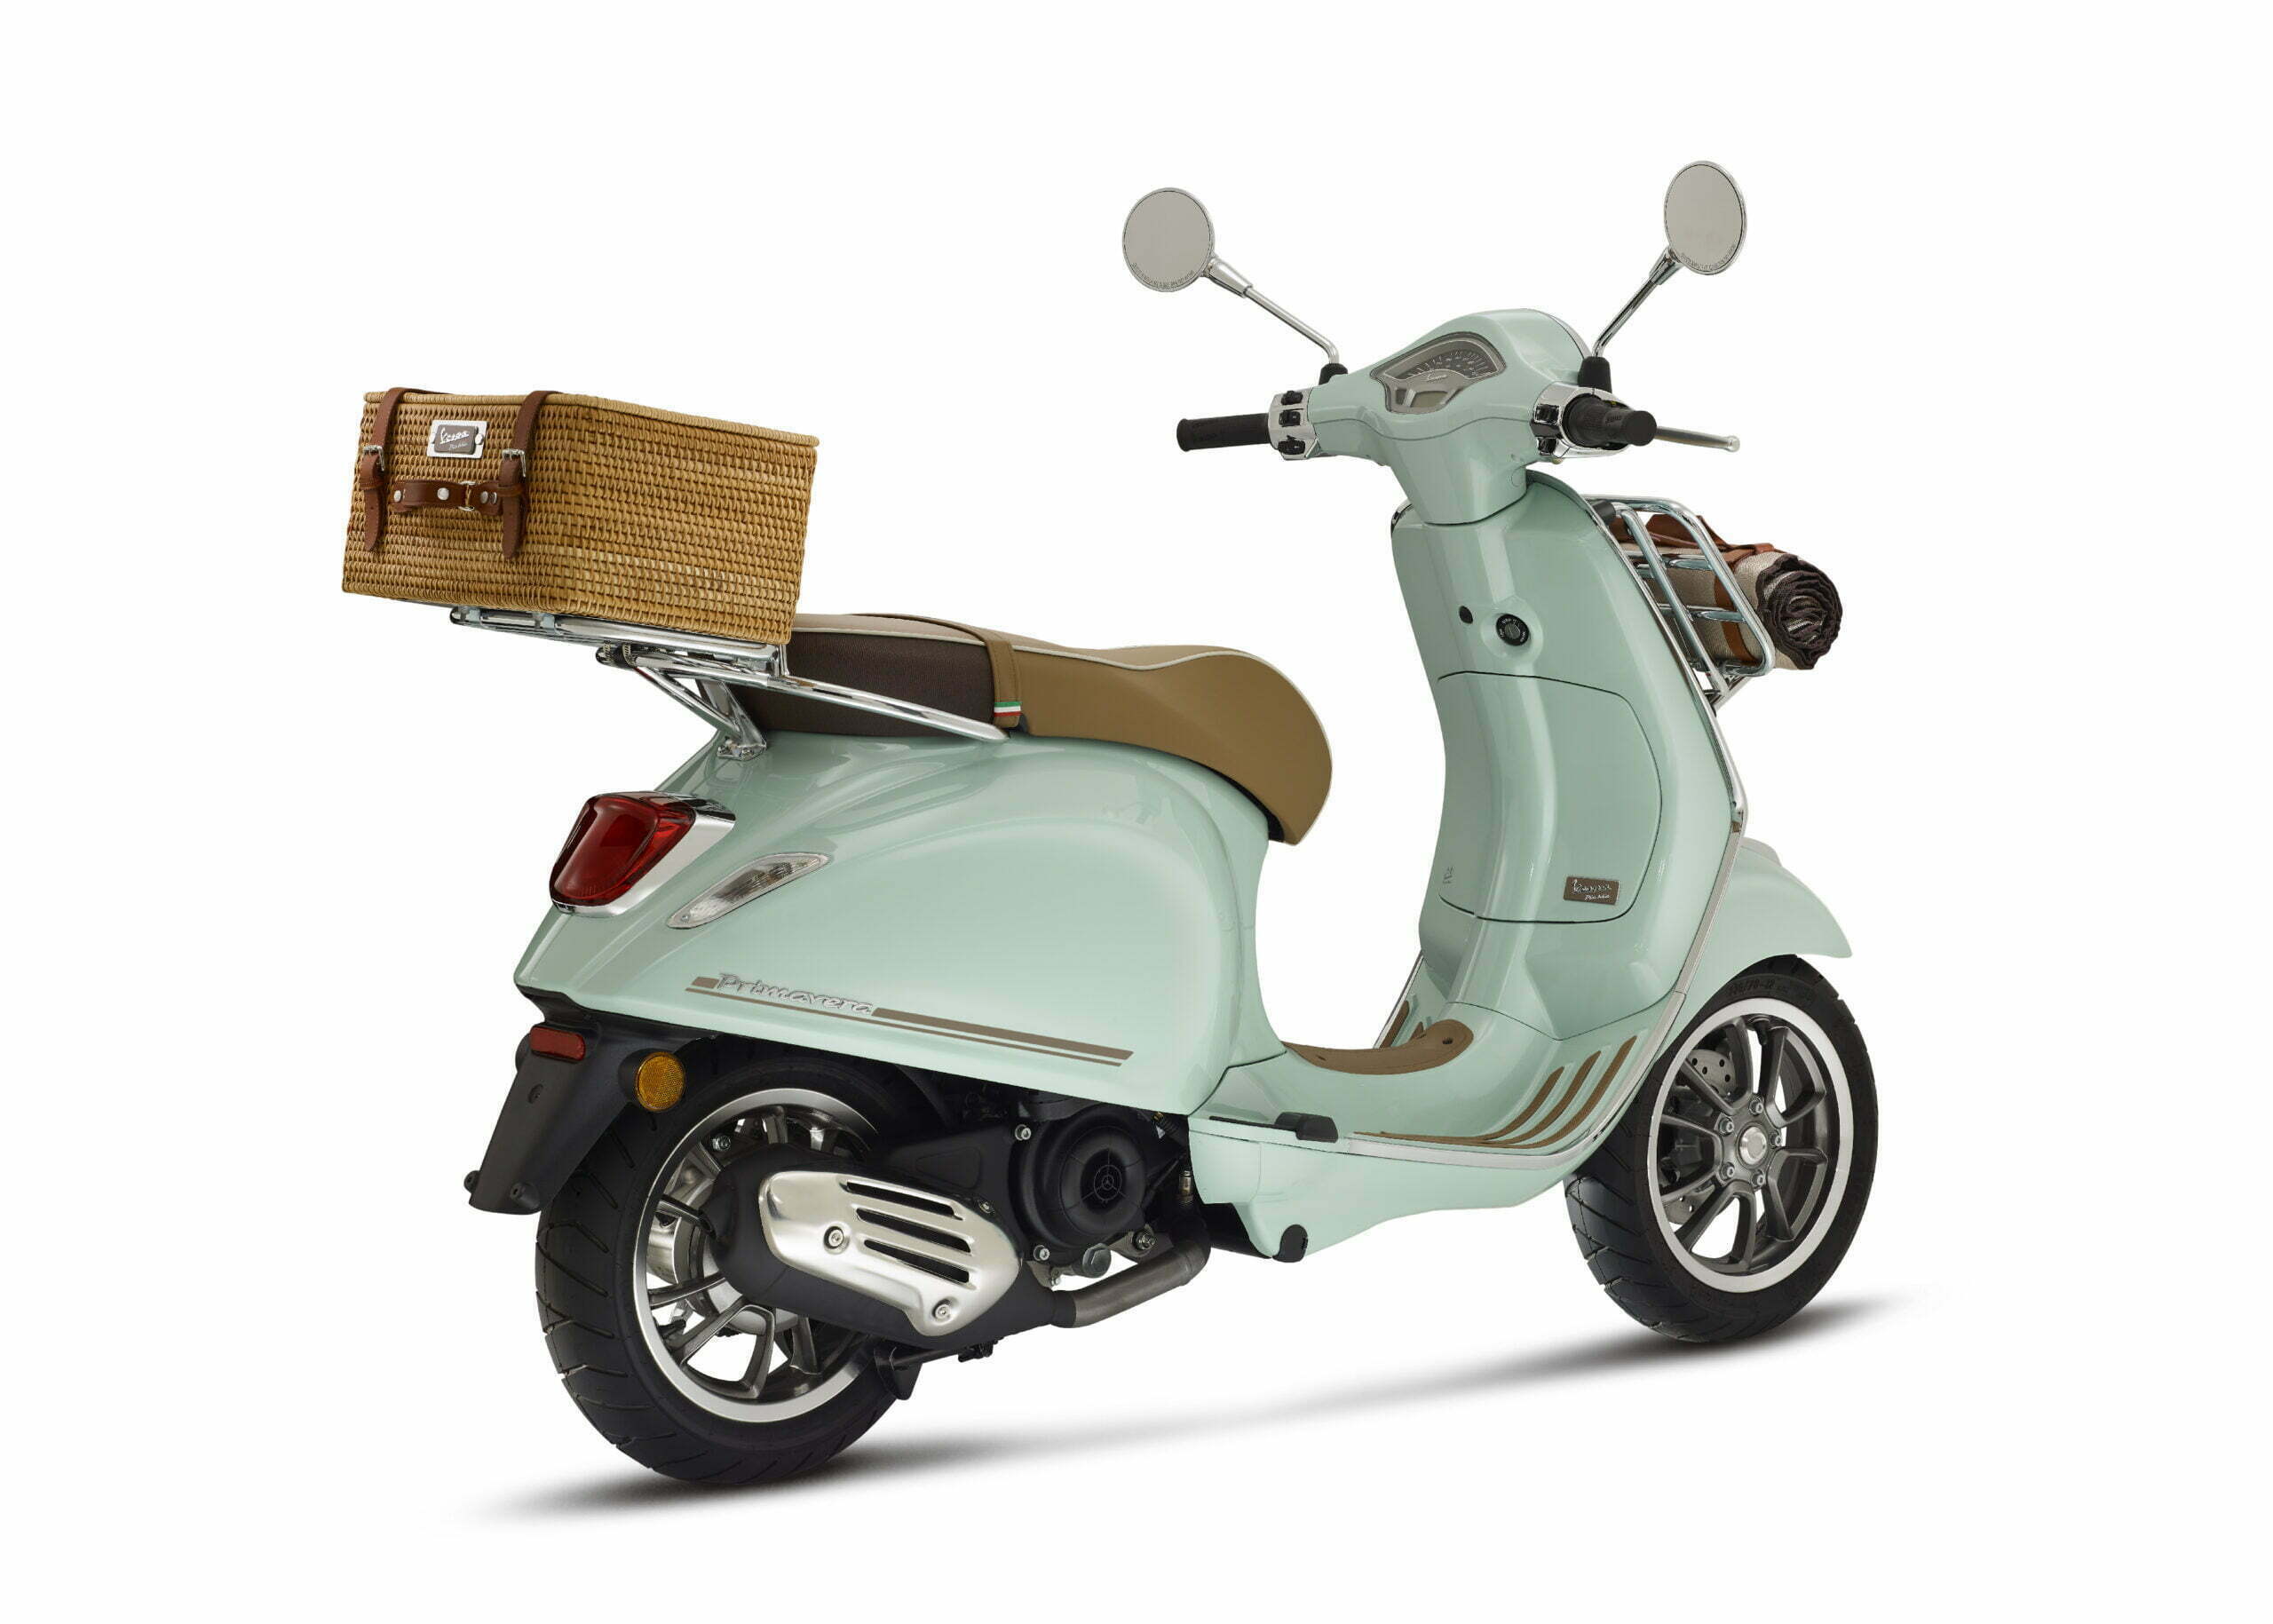 New 2022 Vespa Pic Nic Scooter Revealed (2)